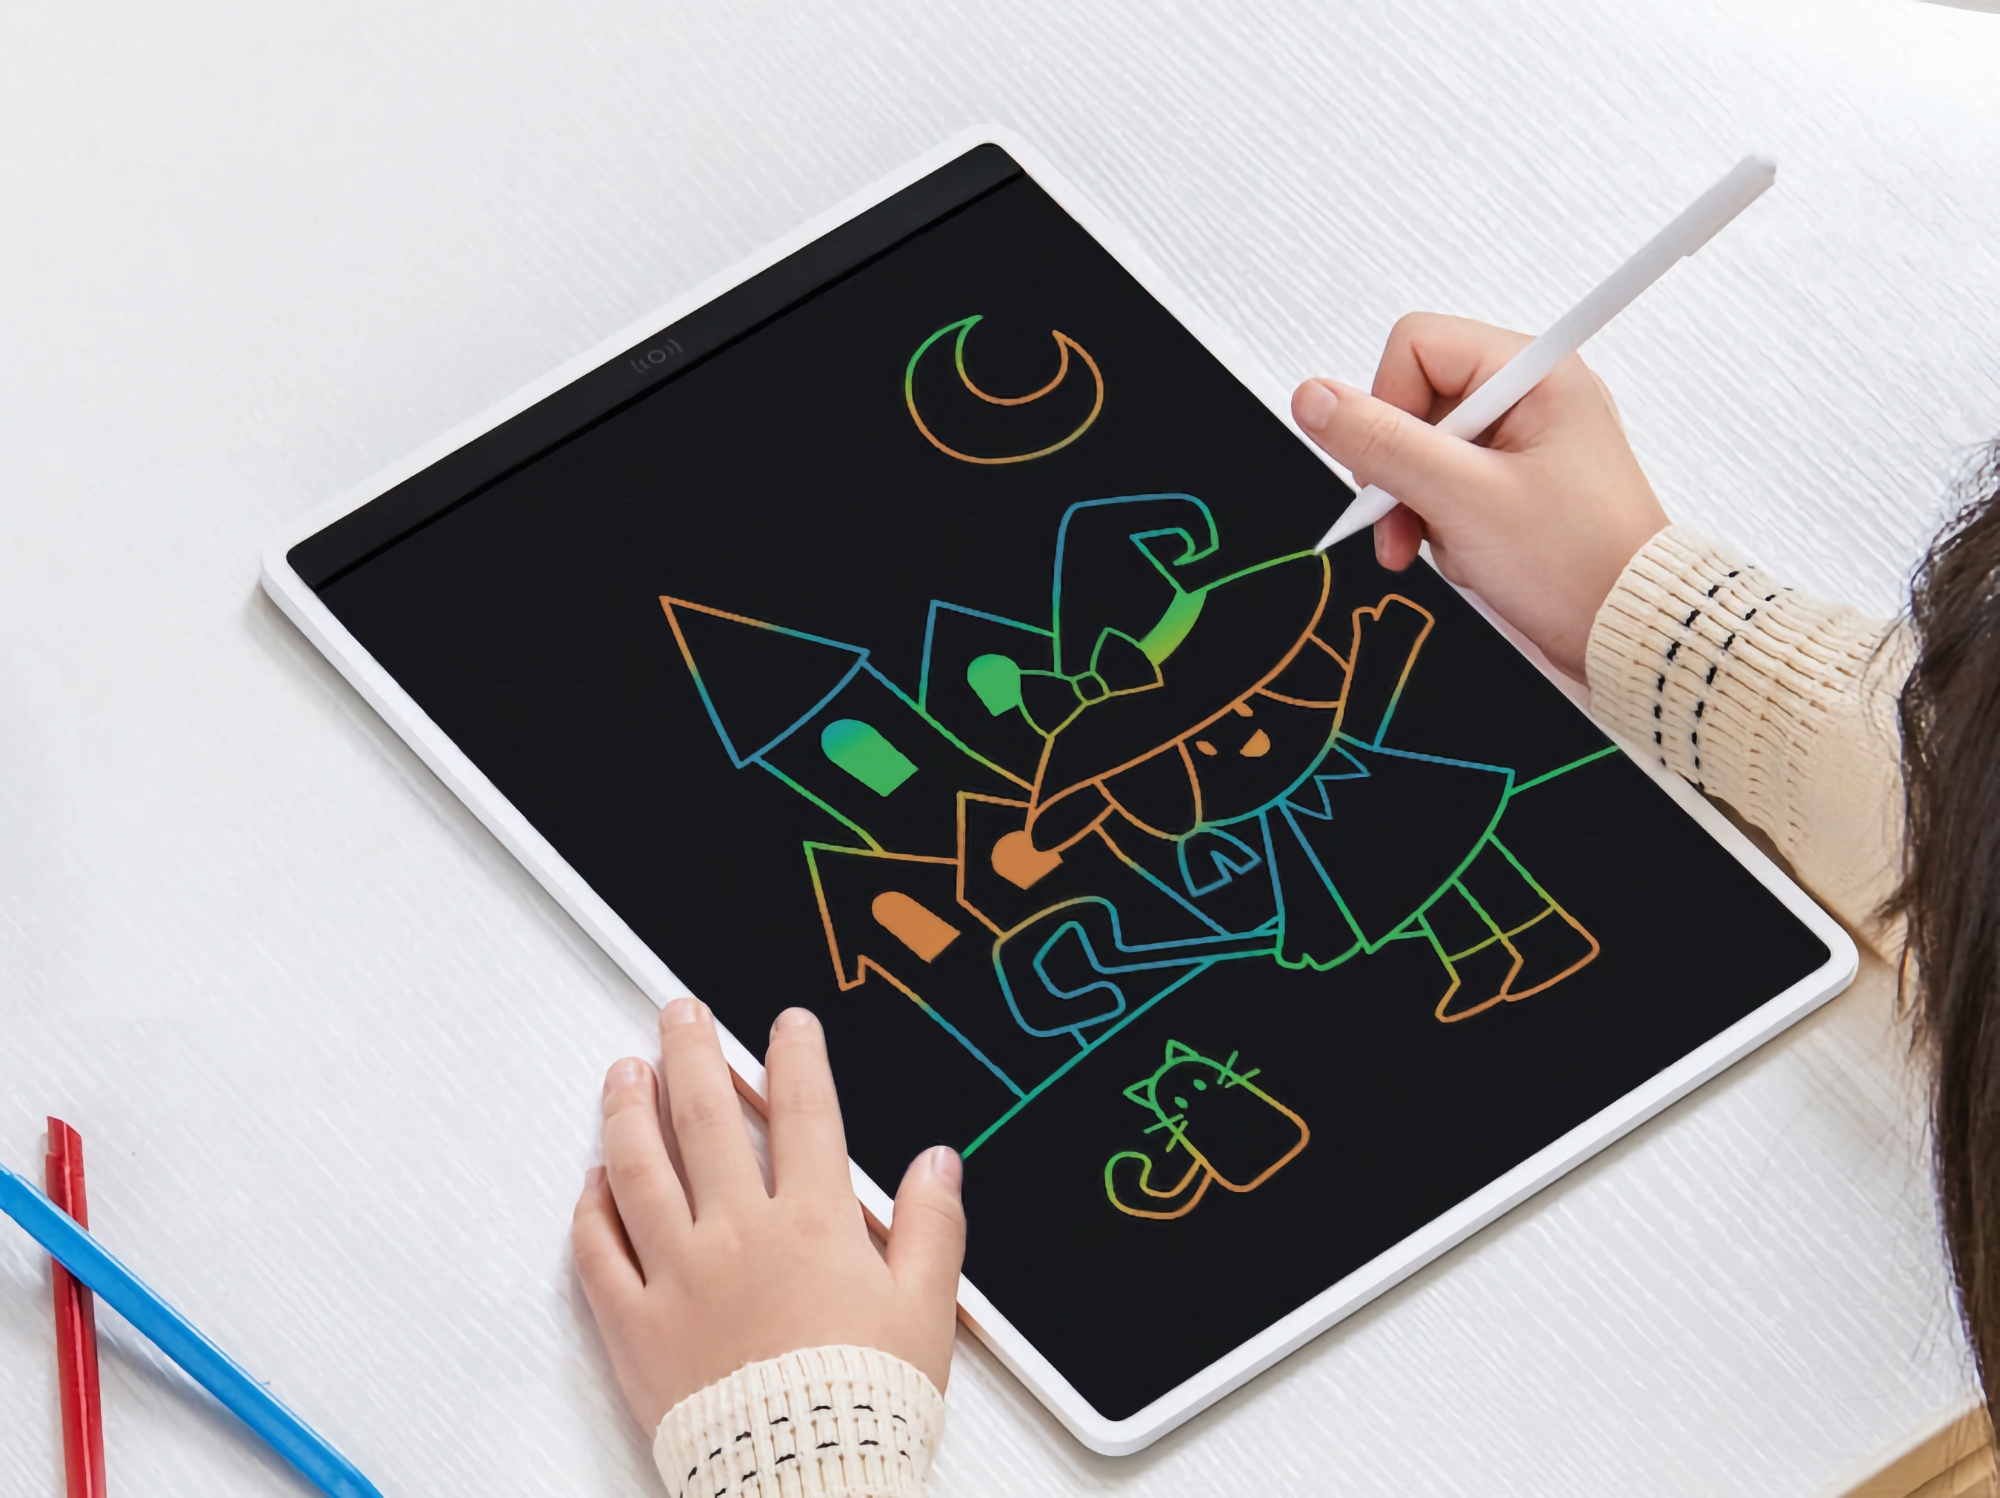 Xiaomi started selling MiJia LCD Small Blackboard Color Edition: Color drawing tablet with stylus and screen up to 13 inches